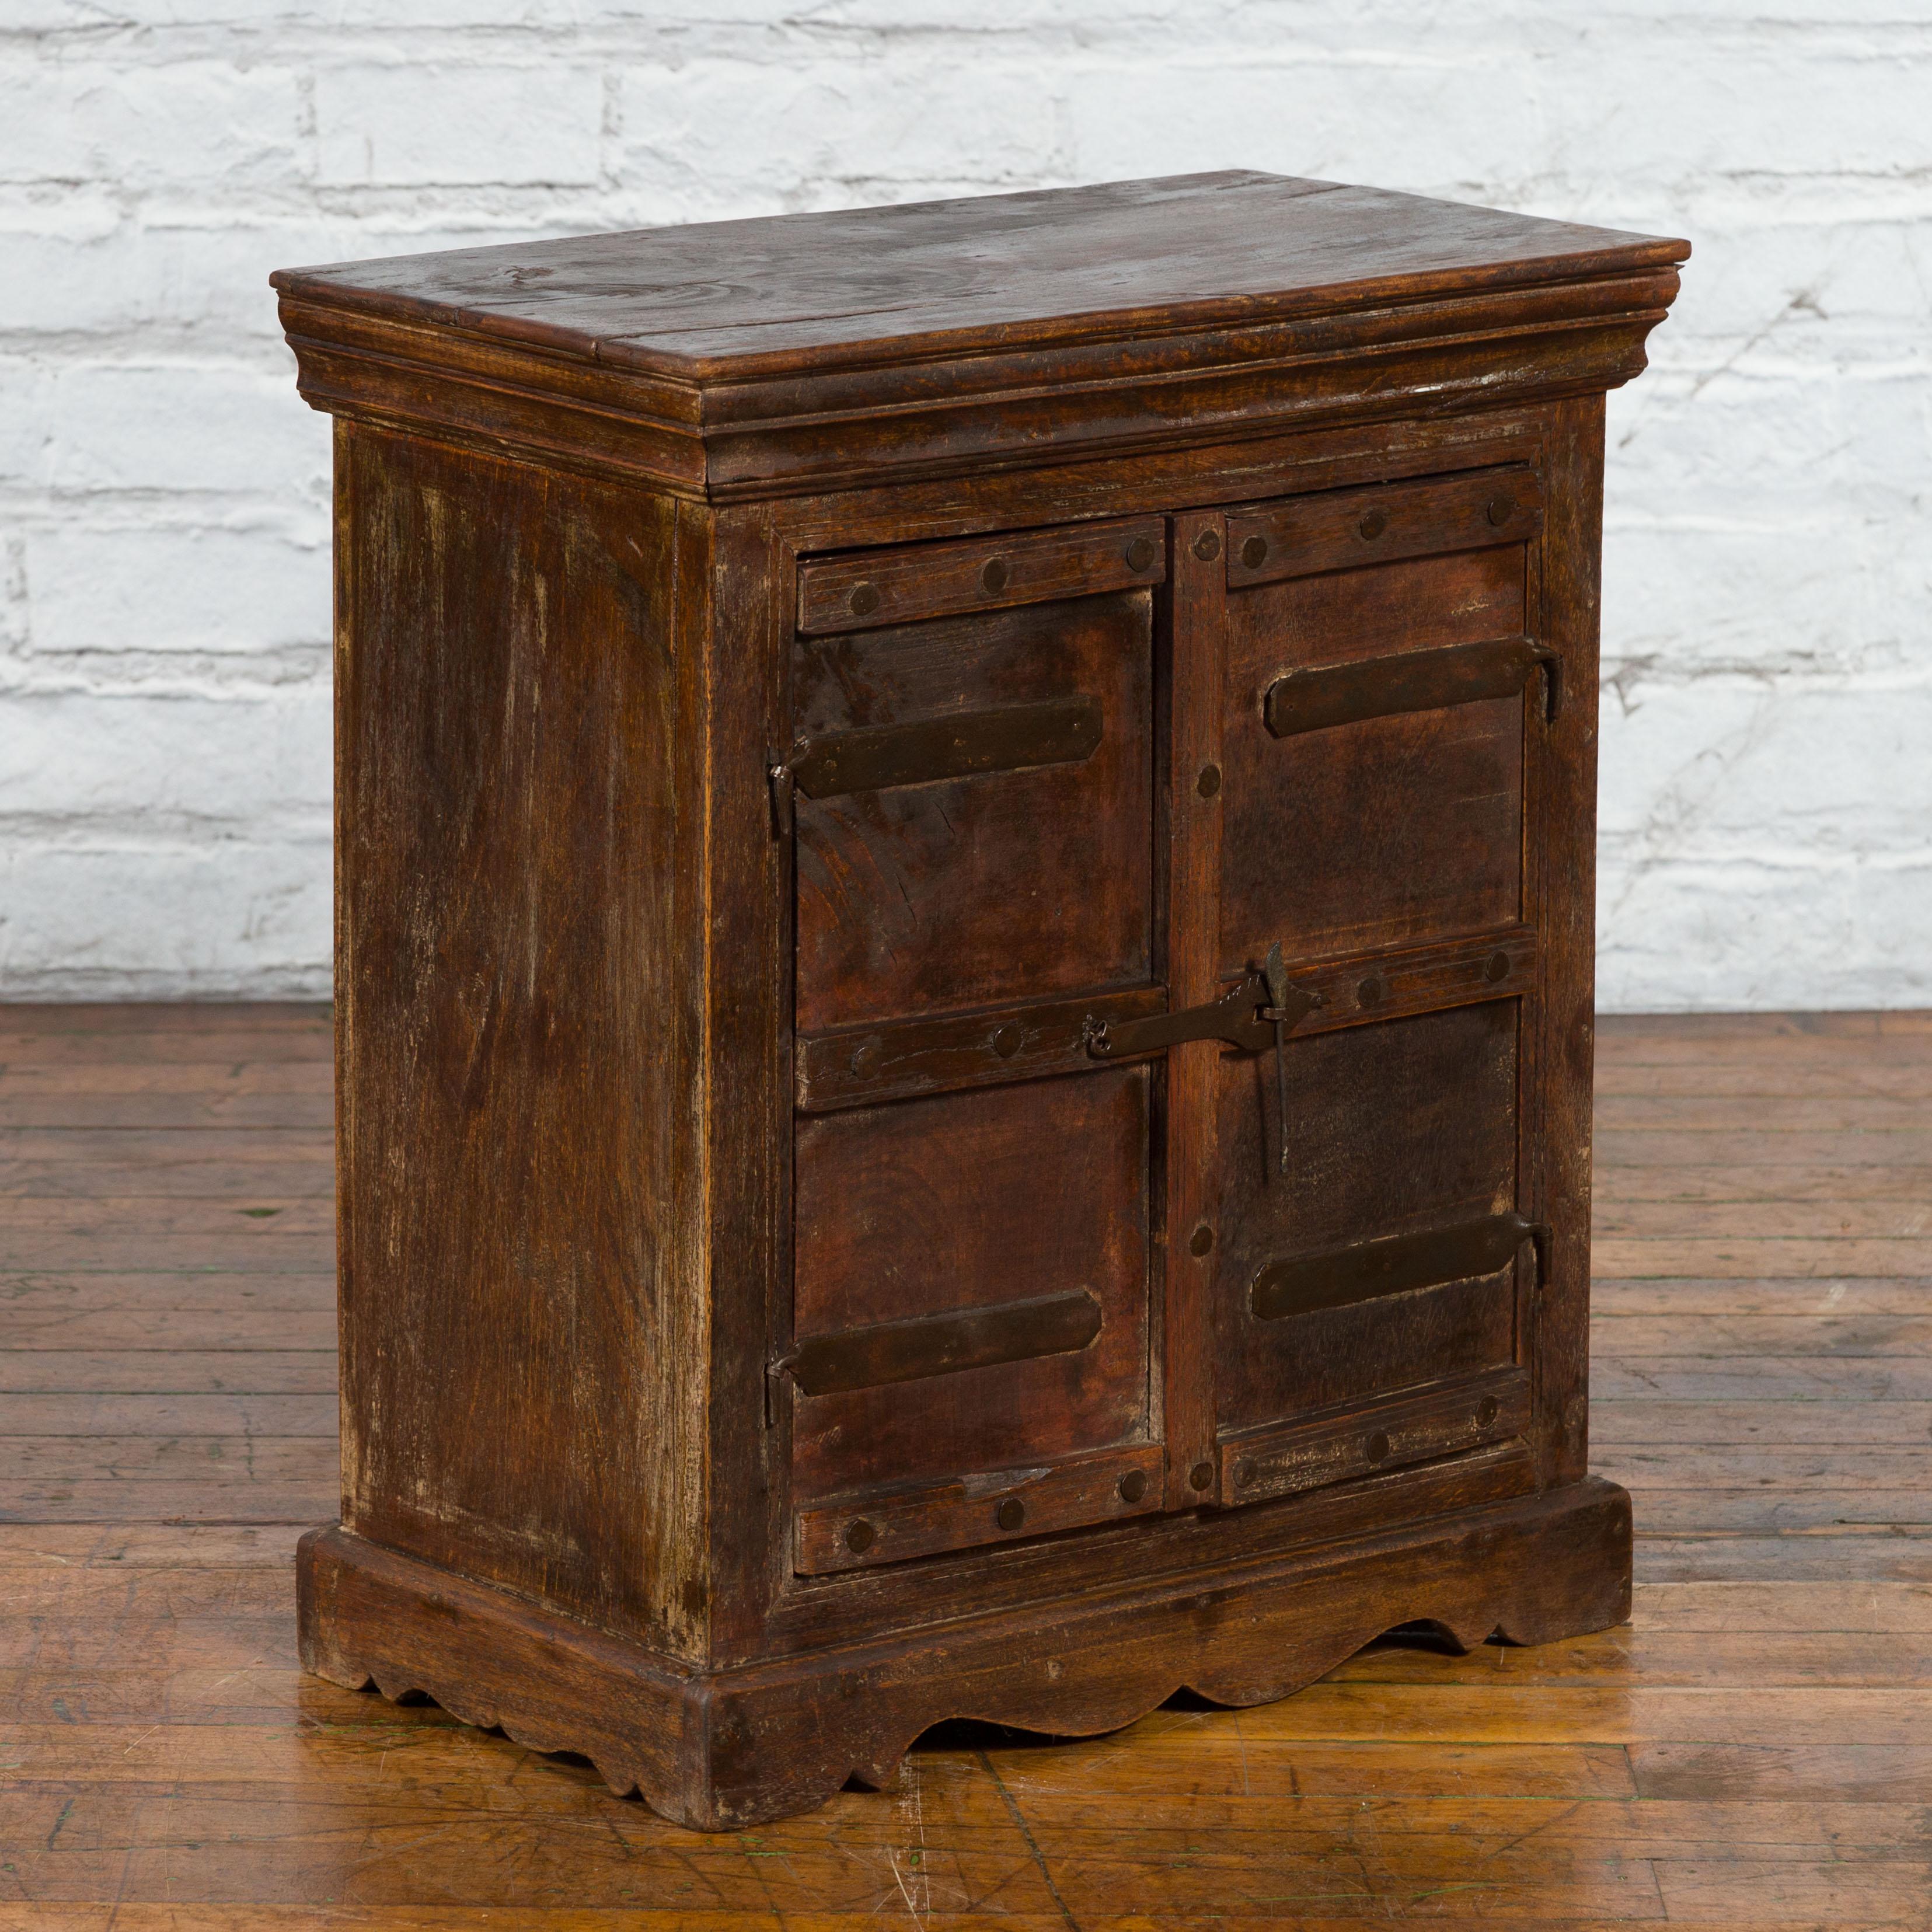 20th Century Rustic Indian Vintage Sheesham Small Cabinet with Iron Hardware Dark Patina